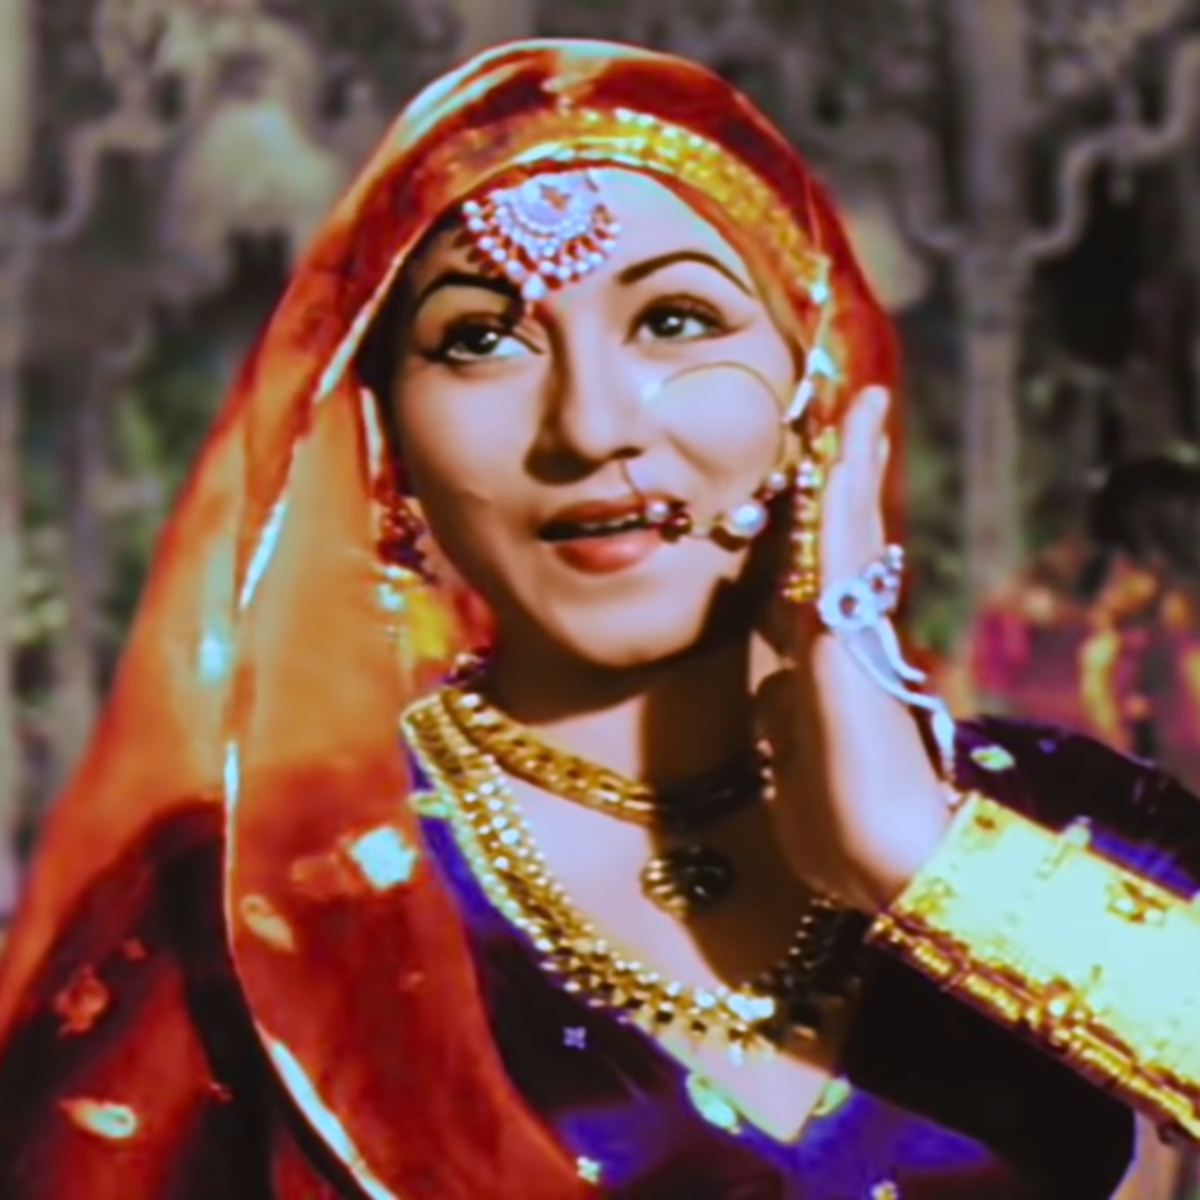 Madhubala Birth Anniversary: On V-Day, remembering how the star personified emotion in all its changing hues